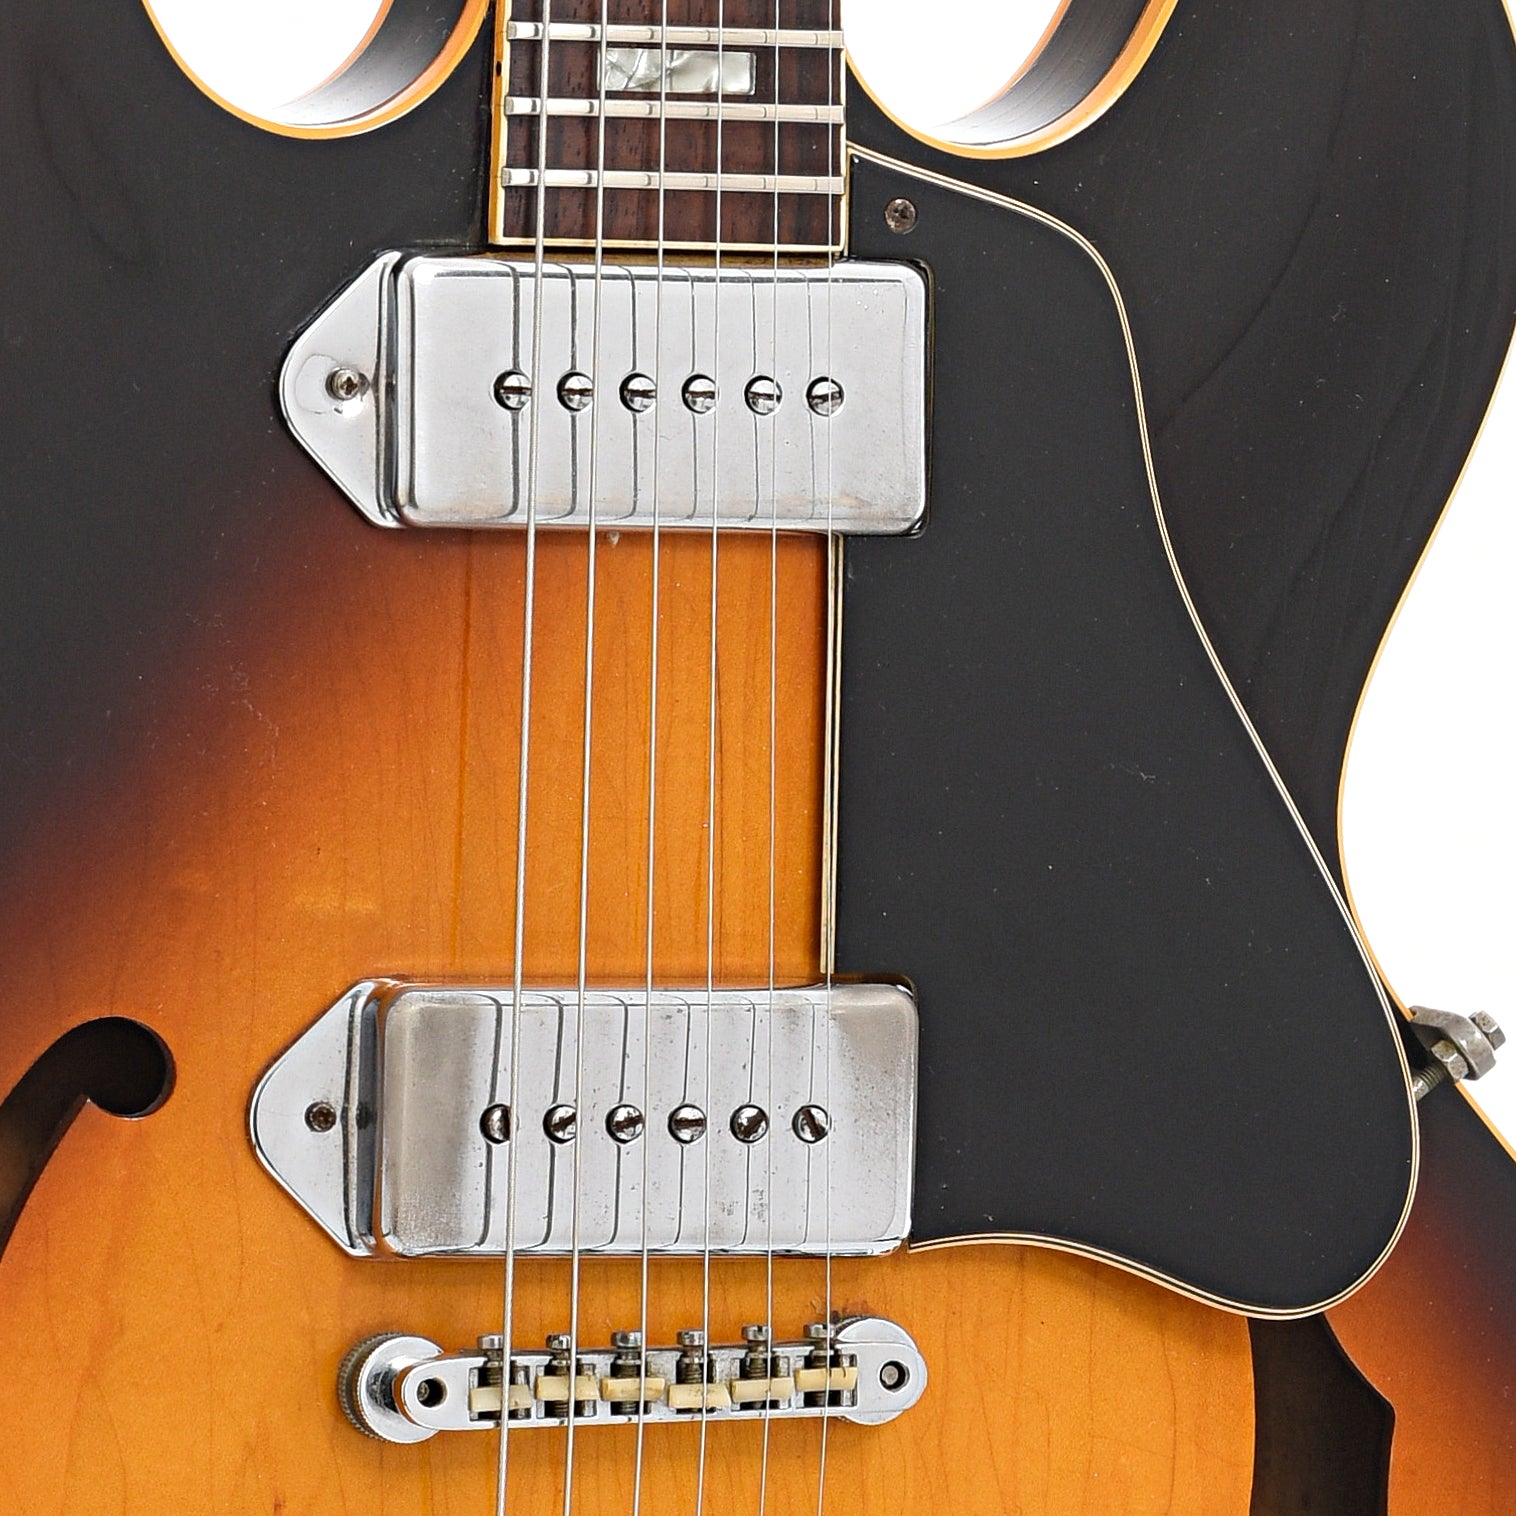 Bridge and Pickups of Gibson ES-330TD Hollow Body Electric Guitar (c.1968)